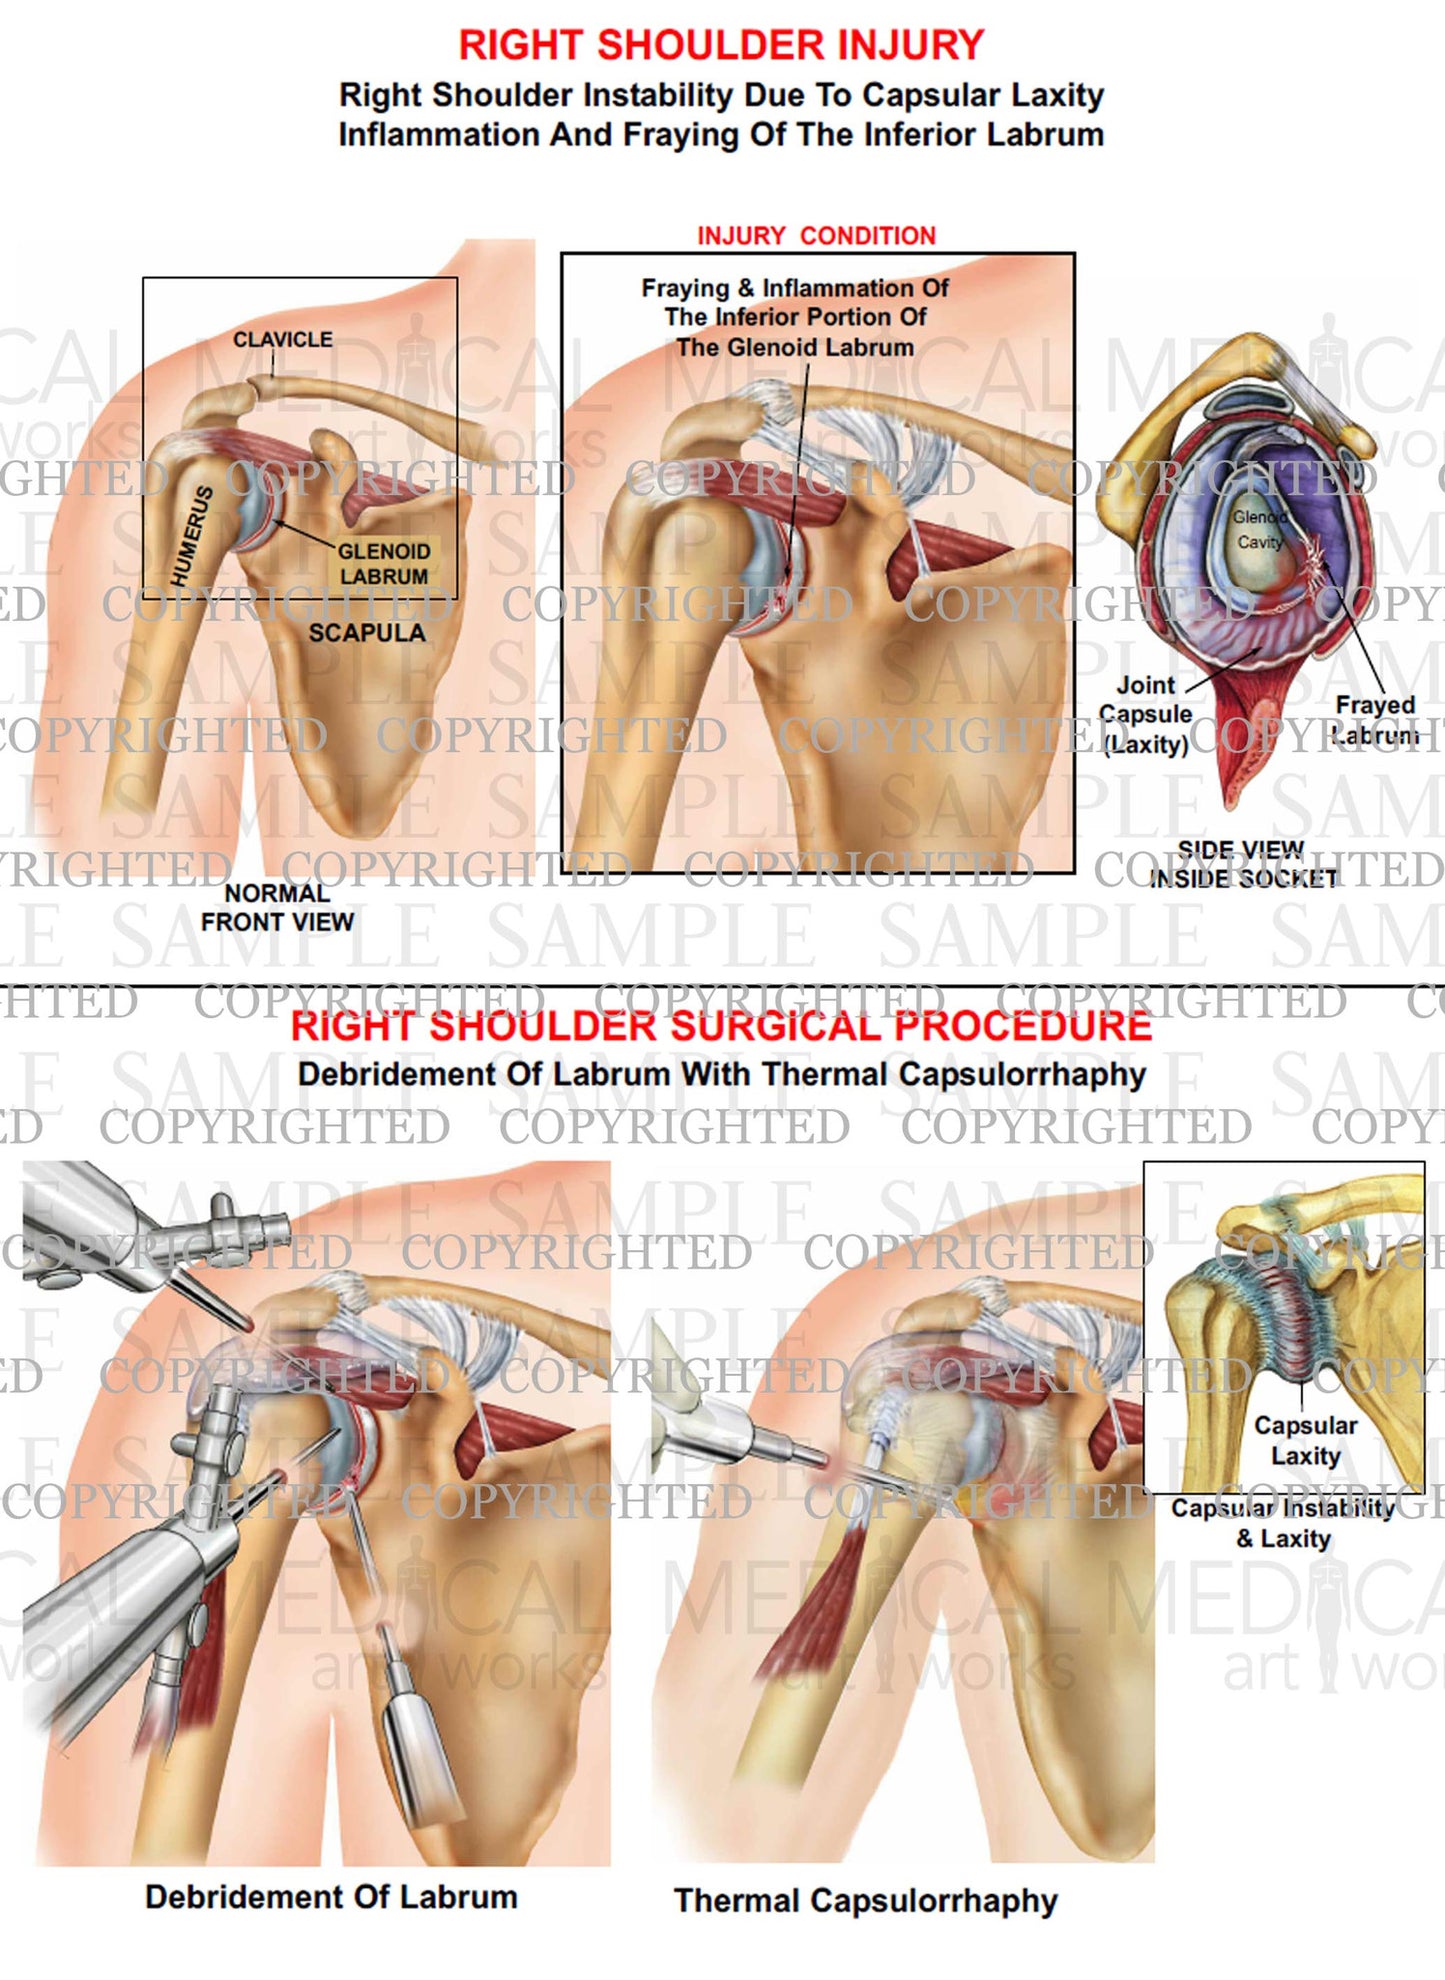 Right shoulder instability, laxity - Surgical debridement with thermal capsulorrhaphy